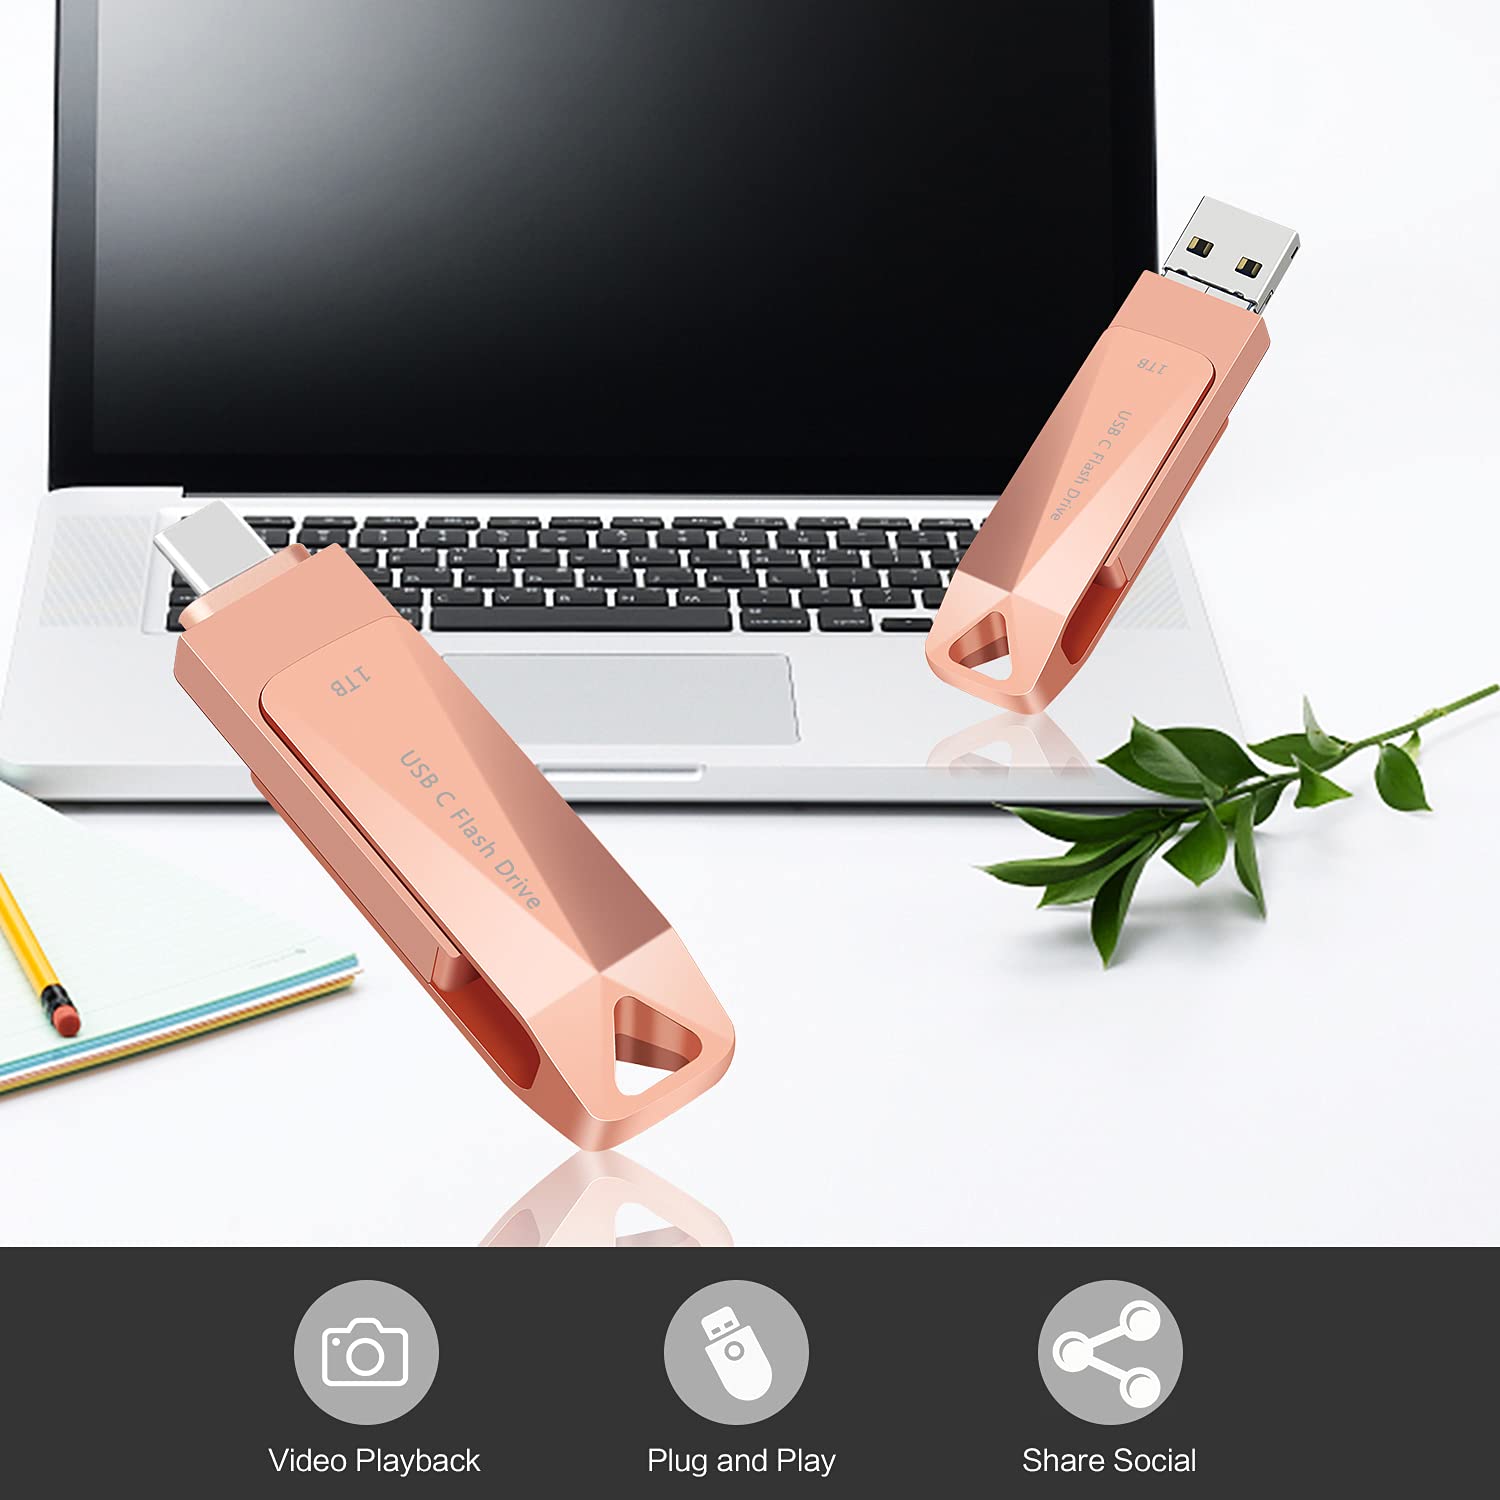 USB C 1TB Flash Drive Memory Stick The Photo Stick for Android Phone Thumb Drive 1TB USB 3.1 Data Storage Drive WANSISEN for MacBook Pad Pro Android Phone USB C Computers and Tablets 1TB ZS Black…